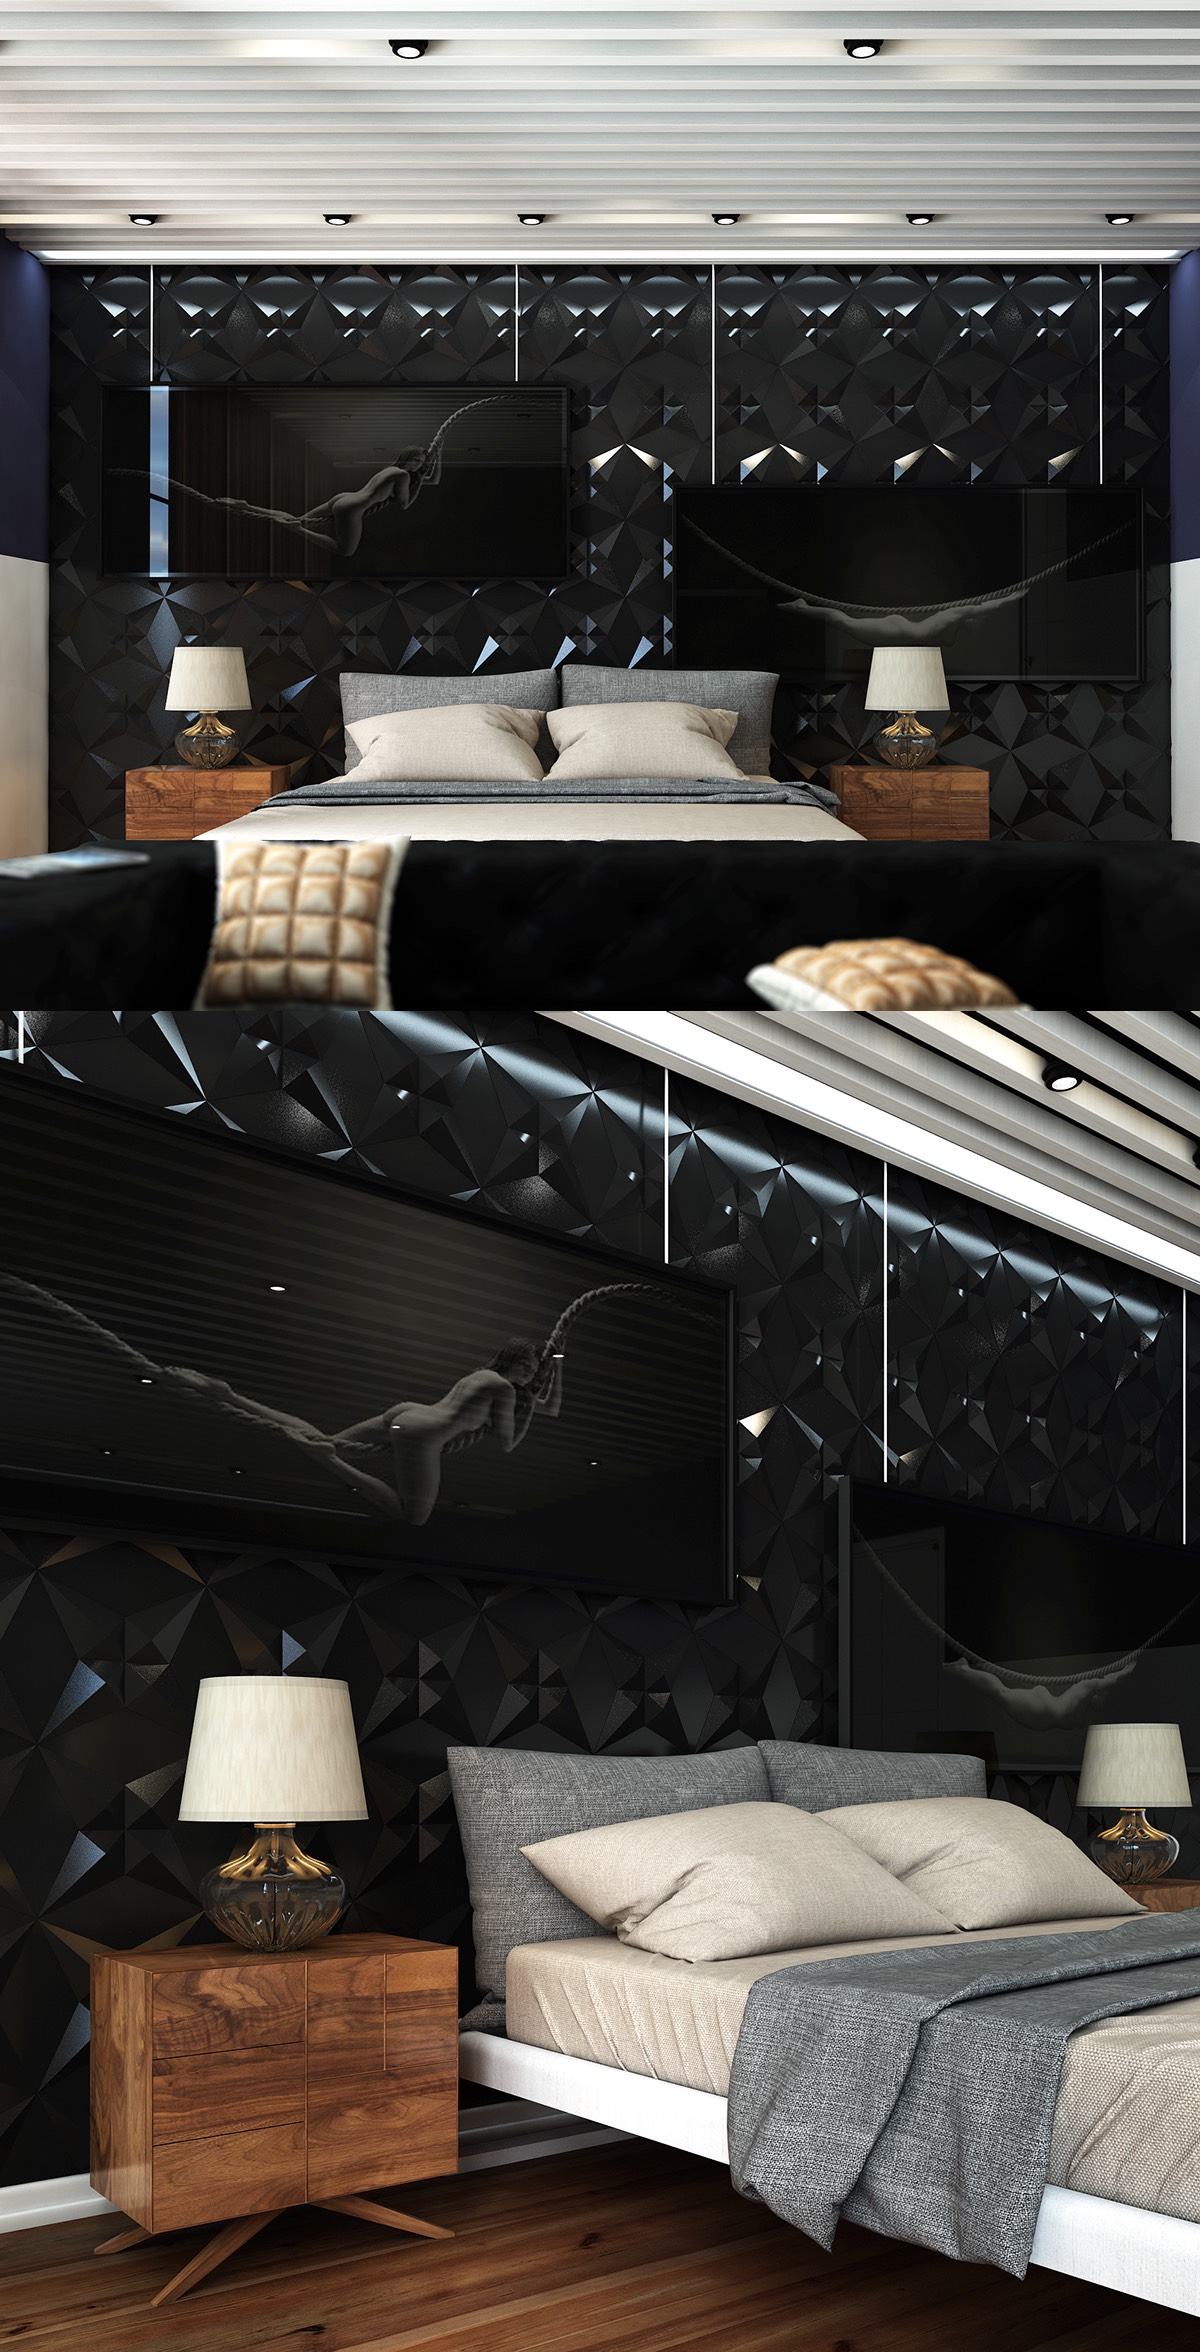 Decoration ideas for dark bedrooms "width =" 1200 "height =" 2352 "srcset =" https://mileray.com/wp-content/uploads/2020/05/1588511003_547_15-Awesome-Wall-Texture-For-Your-Bedroom-Decorating-Ideas.jpg 1200w, https://mileray.com /wp-content/uploads/2016/06/Nurlan-Sultanli-153x300.jpg 153w, https://mileray.com/wp-content/uploads/2016/06/Nurlan-Sultanli-768x1505.jpg 768w, https: / /mileray.com/wp-content/uploads/2016/06/Nurlan-Sultanli-522x1024.jpg 522w, https://mileray.com/wp-content/uploads/2016/06/Nurlan-Sultanli-696x1364.jpg 696w , https://mileray.com/wp-content/uploads/2016/06/Nurlan-Sultanli-1068x2093.jpg 1068w, https://mileray.com/wp-content/uploads/2016/06/Nurlan-Sultanli- 214x420.jpg 214w "sizes =" (maximum width: 1200px) 100vw, 1200px